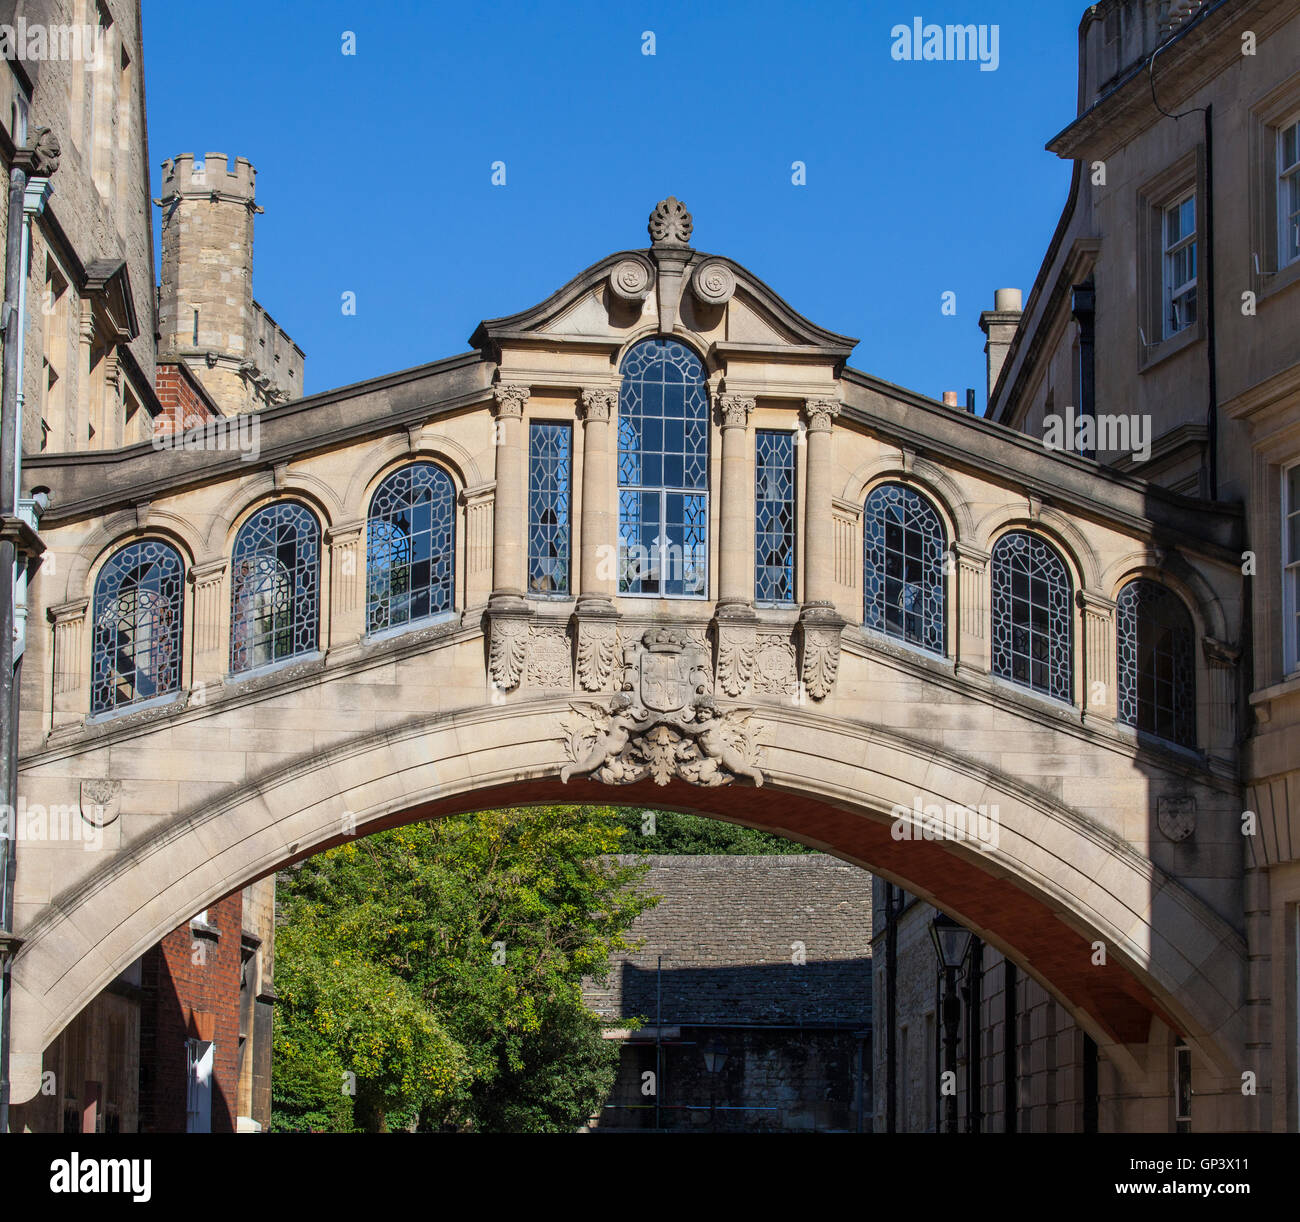 A view of the Bridge of Sighs (also known as Hertford Bridge) in the city of Oxford, England. Stock Photo